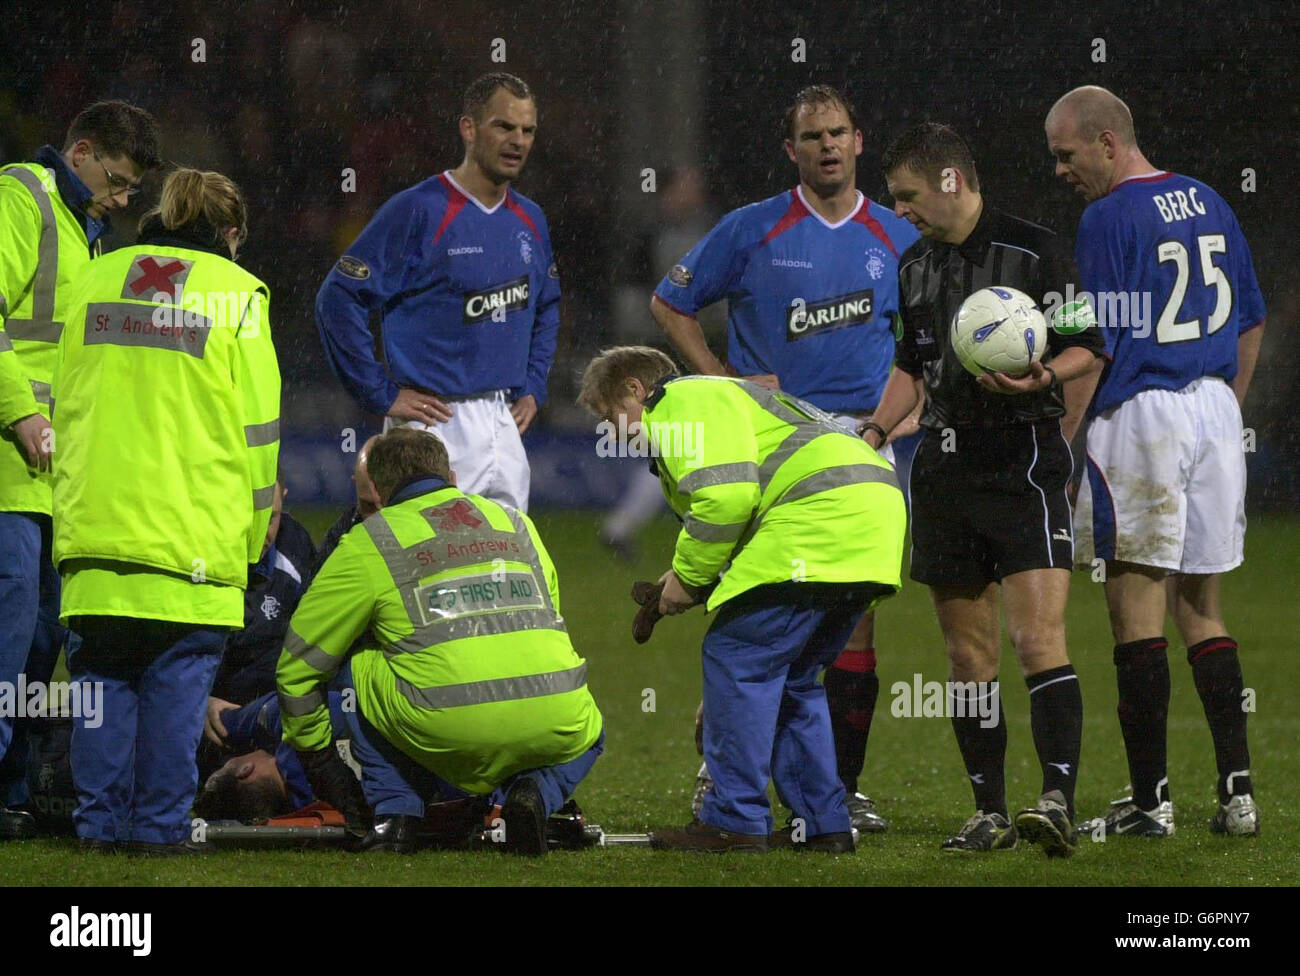 : Rangers' Peter Lovenkrands lies on the ground injured while team-mates Frank de Boer and Ronald de Boer look on during the Bank of Scotland Scottish Premiership match against Partick Thistle at Partick's Firhill Park ground in Glasgow. Stock Photo